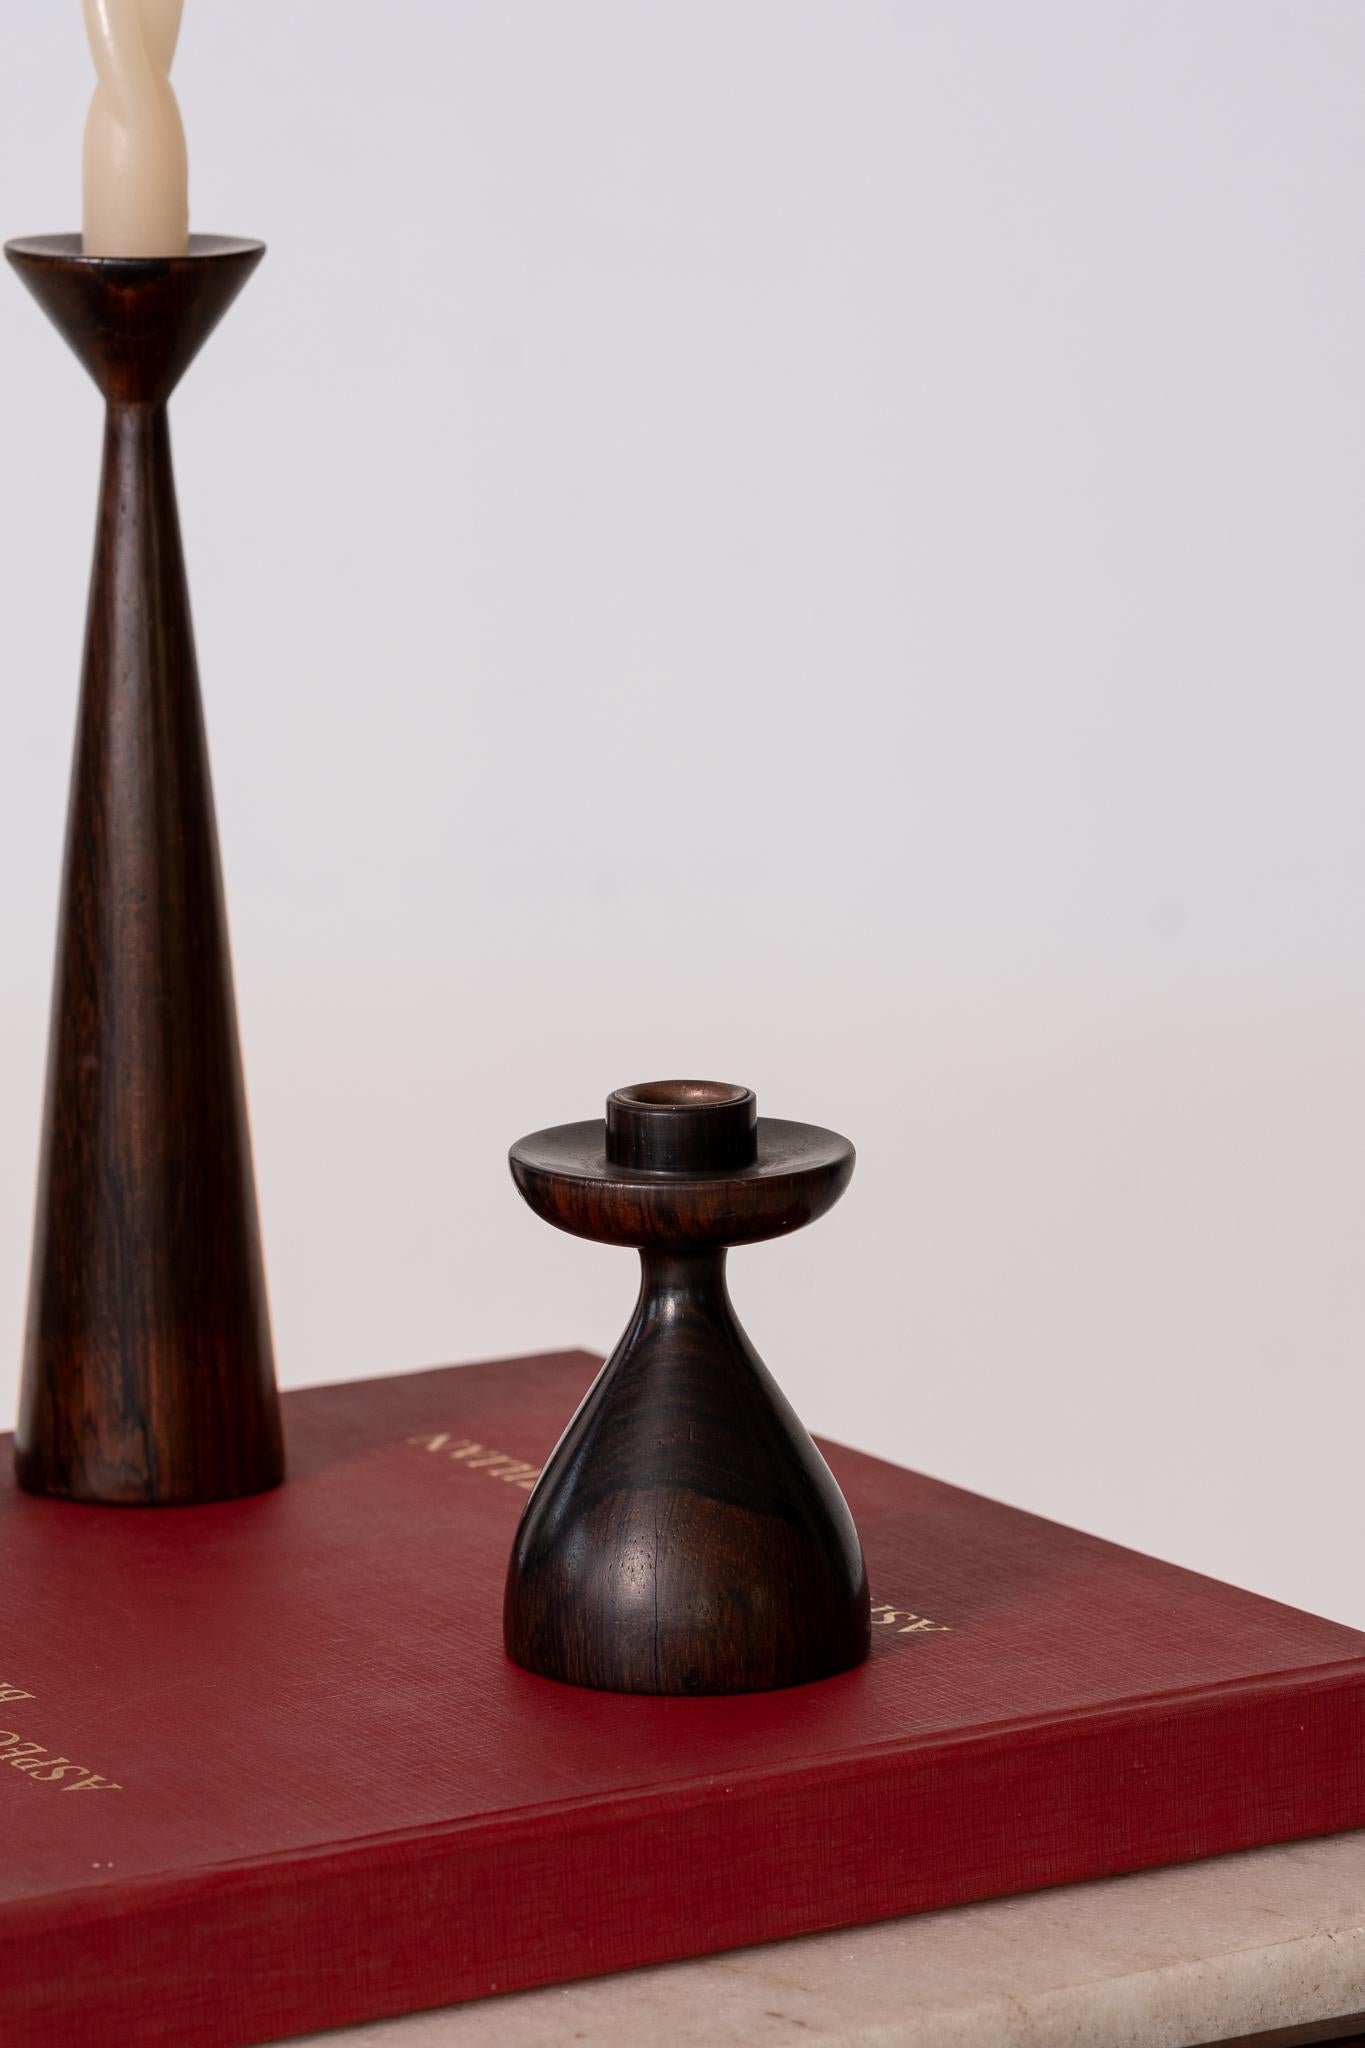 Sculptural vintage candlestick made in Brazilian rosewood with metal finish produced by Casa Finland. Preserves the manufacturer's seal.

Casa Finland produced utilitarian objects in noble Brazilian woods in Brazil in the mid-20th century.